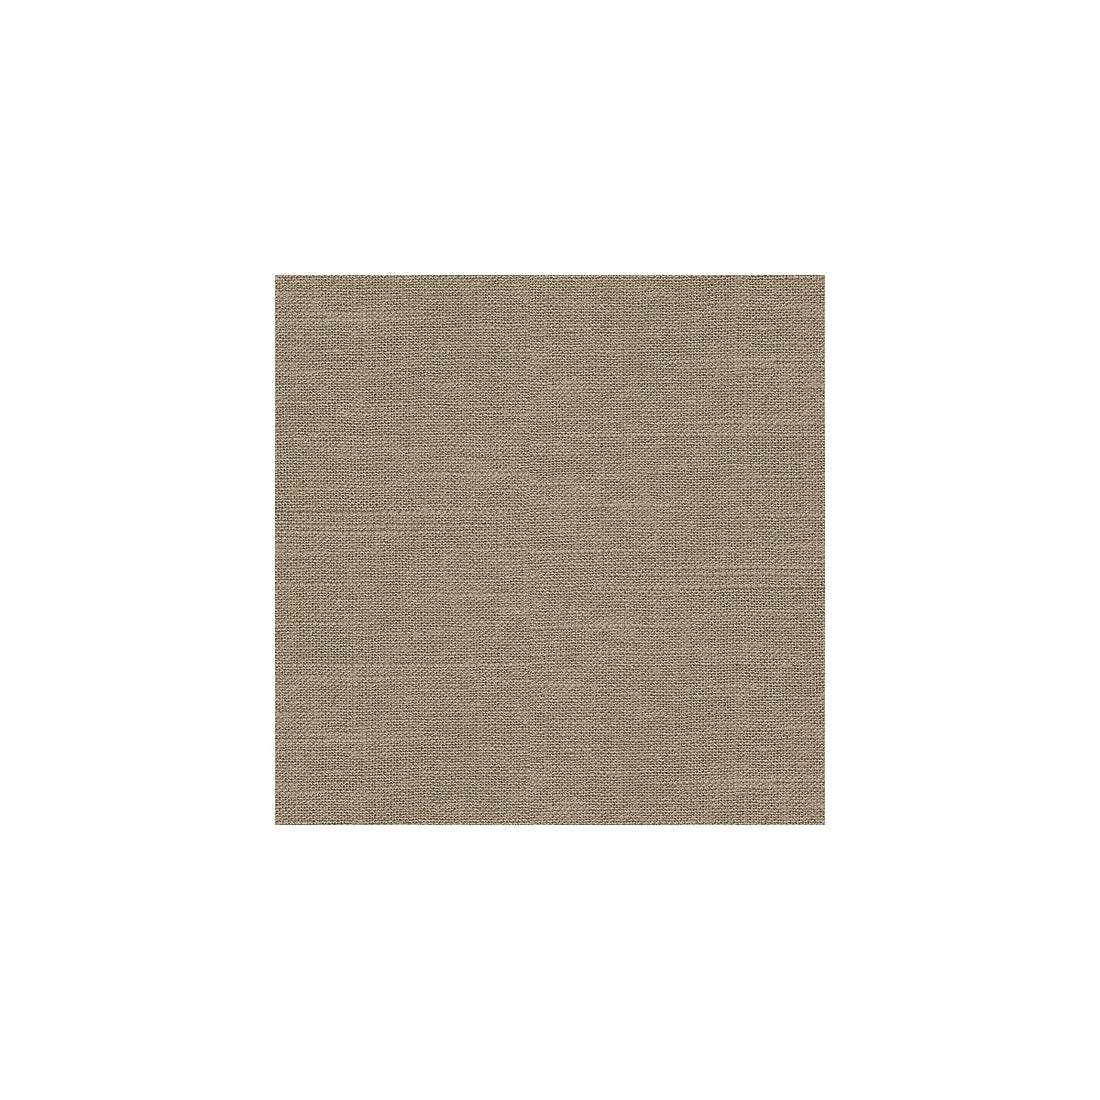 Barnegat fabric in dove color - pattern 24573.1161.0 - by Kravet Basics in the Perfect Plains collection